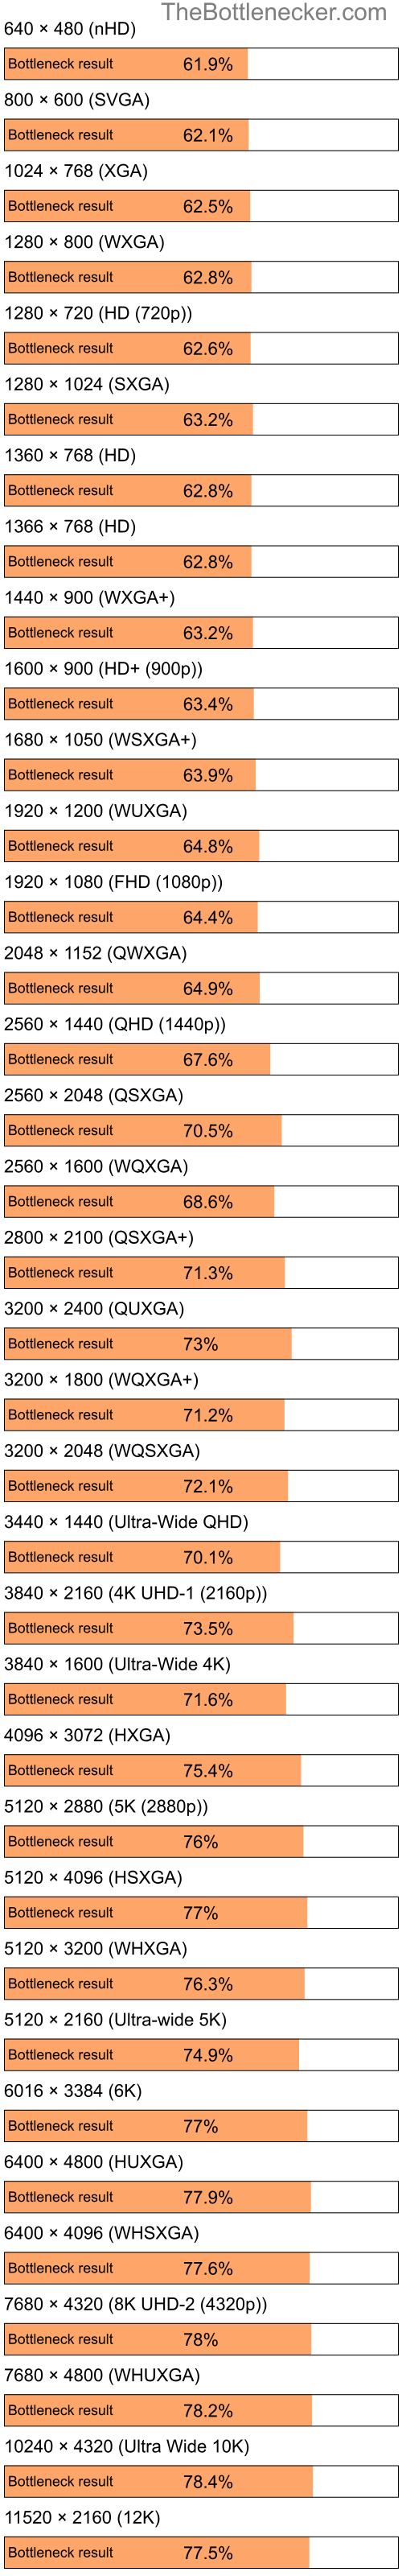 Bottleneck results by resolution for Intel Pentium 4 and NVIDIA Quadro FX 3400 in General Tasks